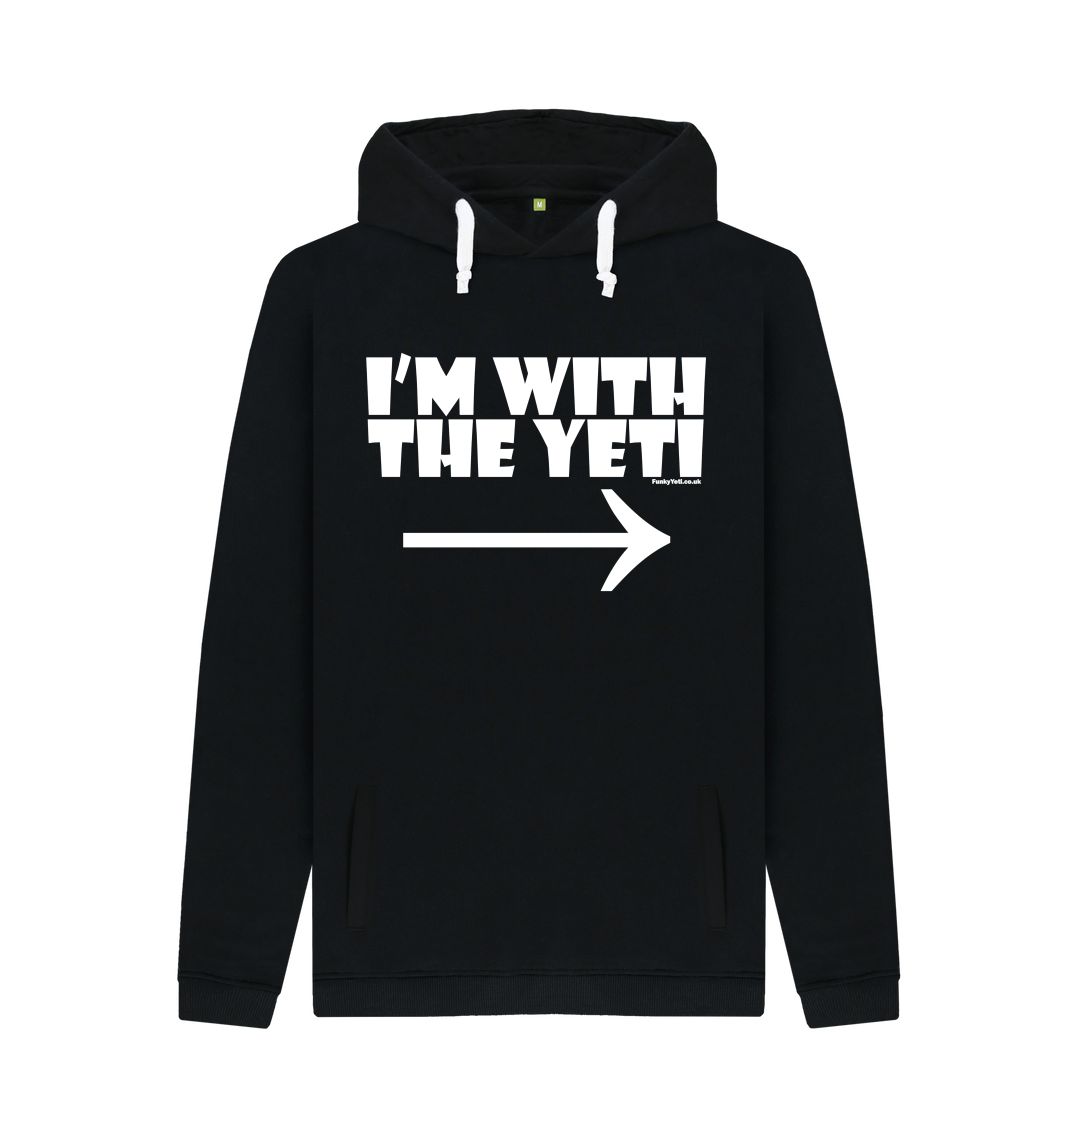 Black Funky Yeti Men's Pullover Hoodie - I'm With The Yeti